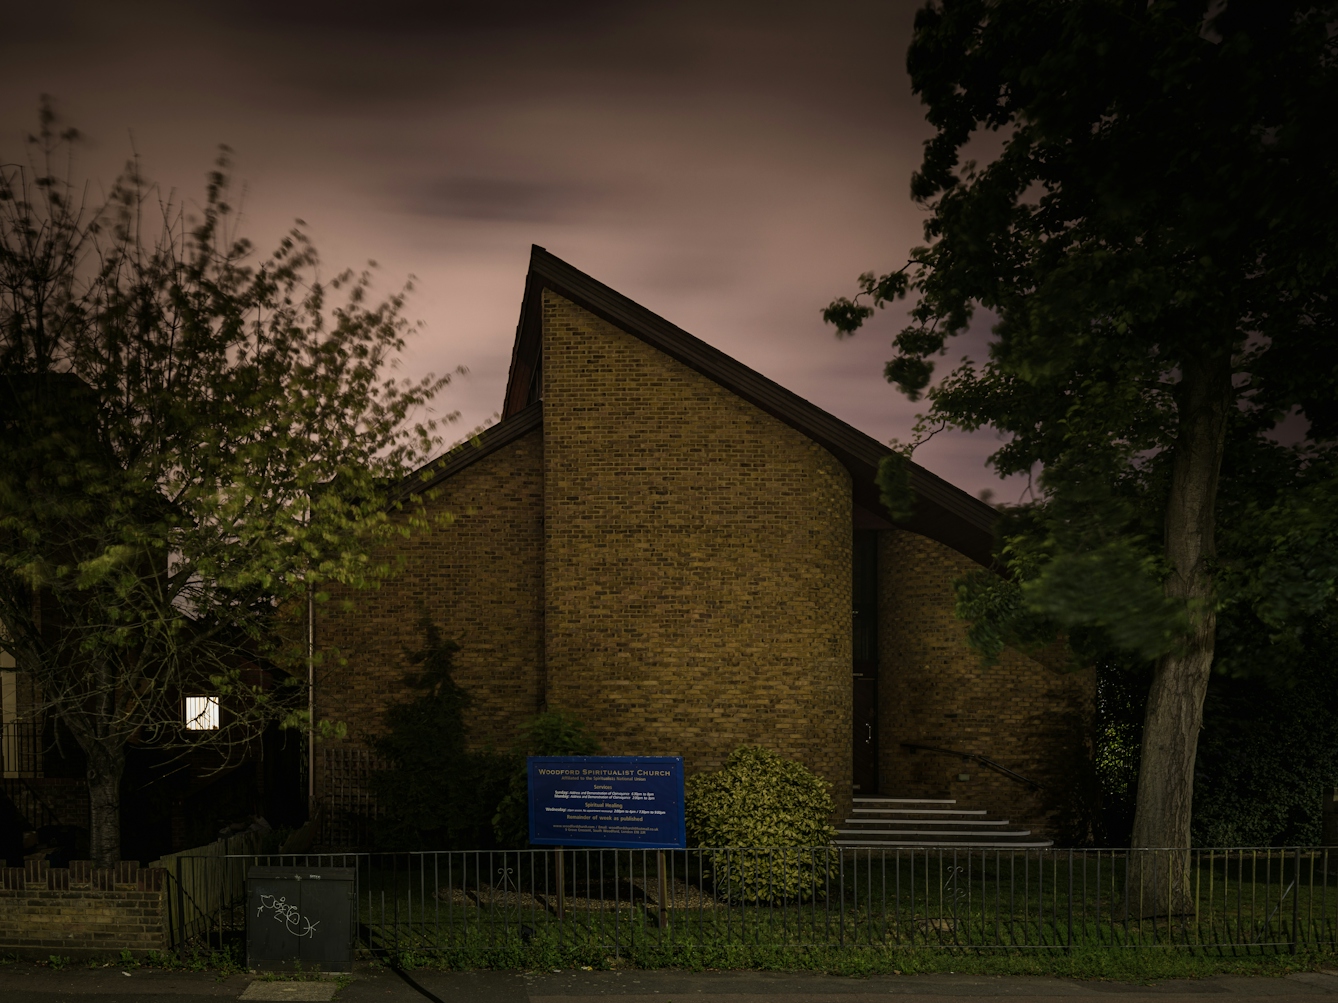 Photograph of Woodford spiritualist church, London at night.  The architecture of the church is such that it the apex of the pitched roof is off centre to the left.  The construction is bare brick with stairs to the entrance on the right.